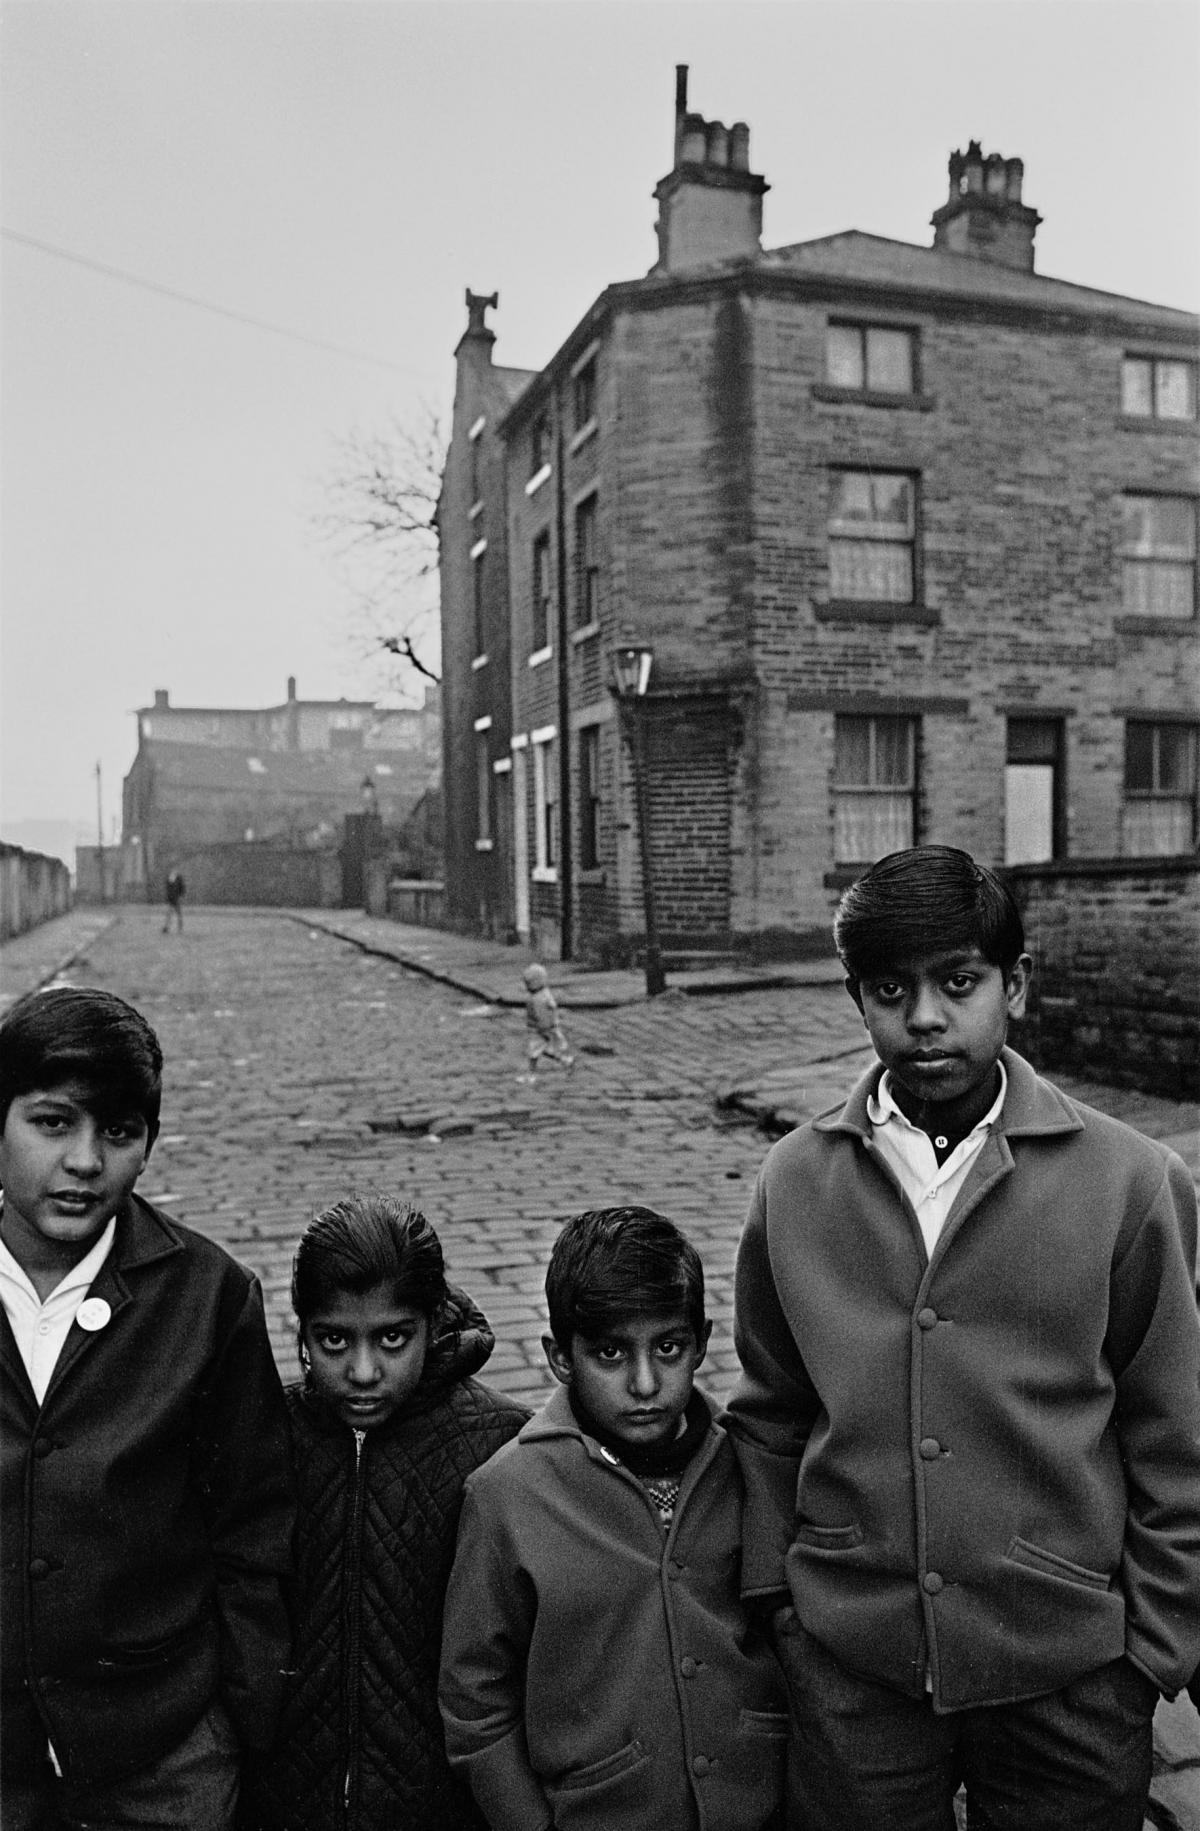 Shelter's pictures of Bradford from the 1960s